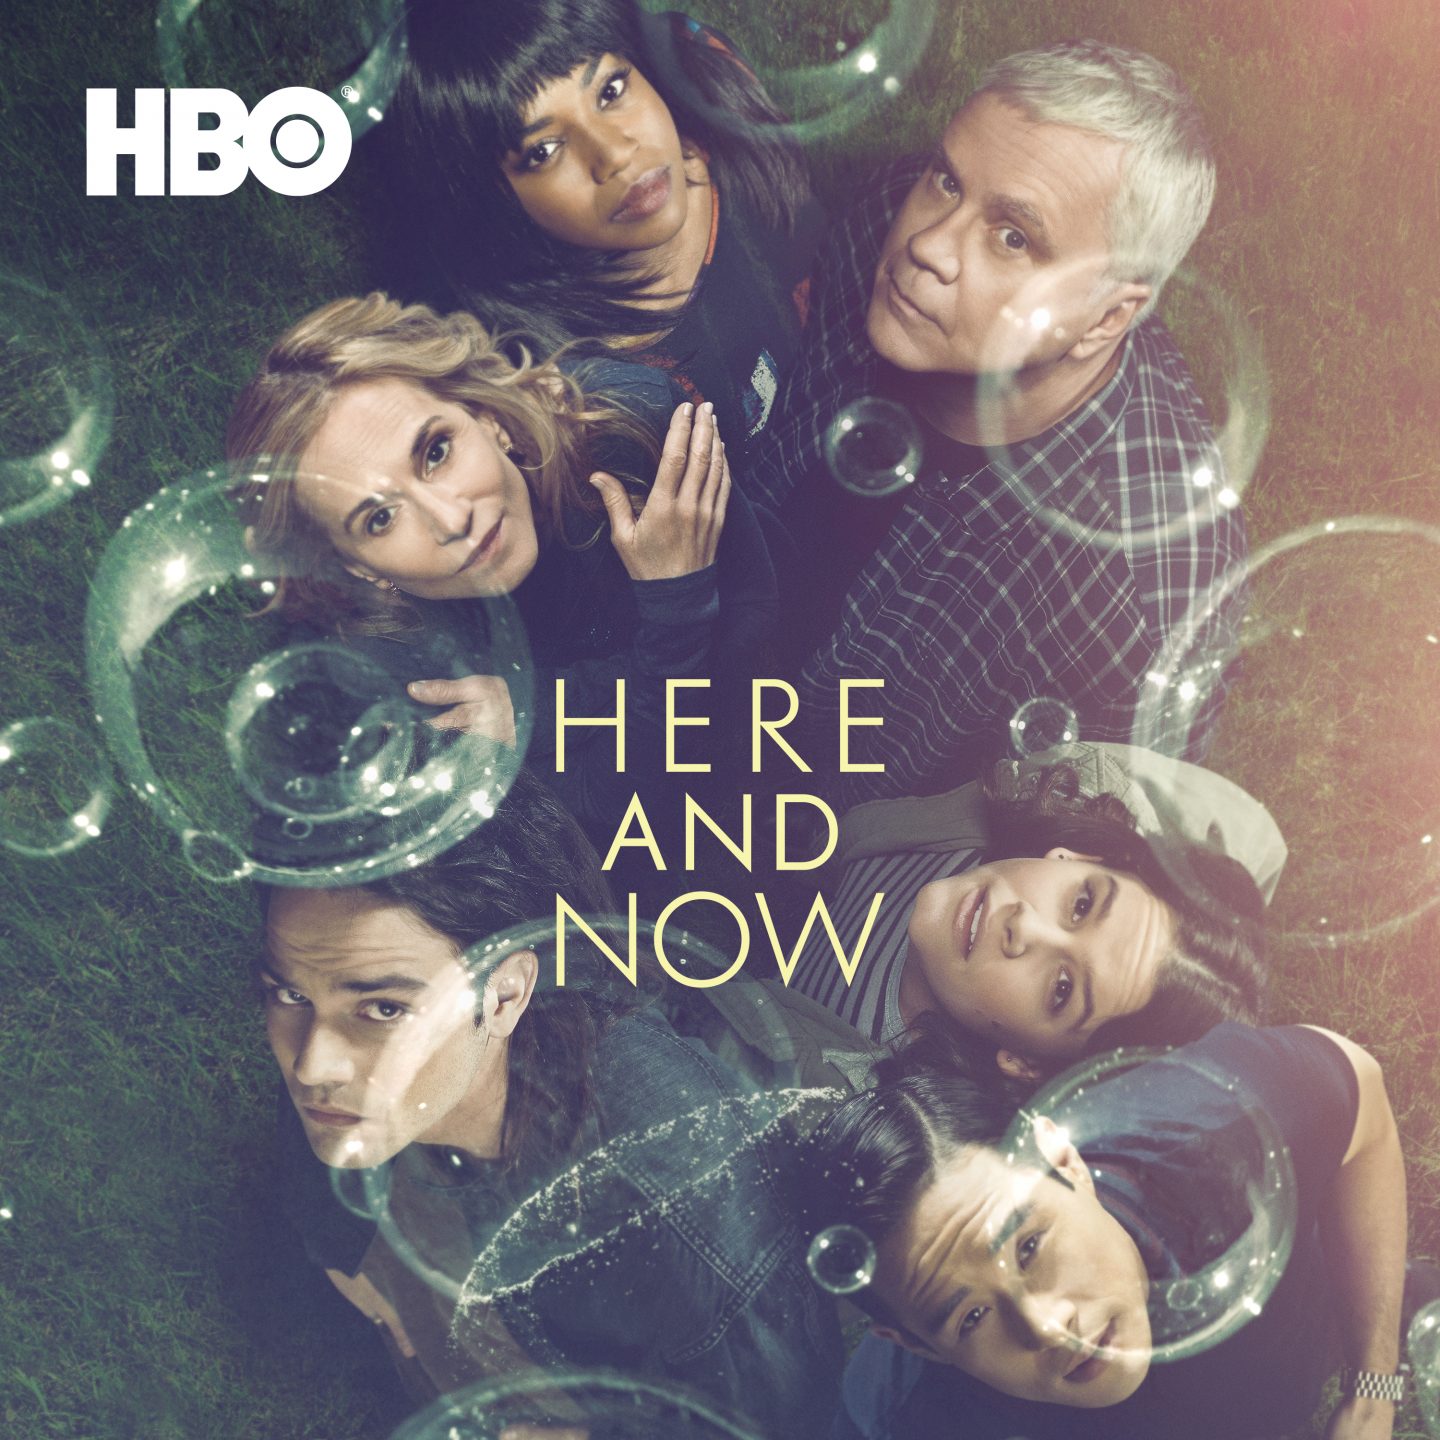 Here And Now cover (HBO)